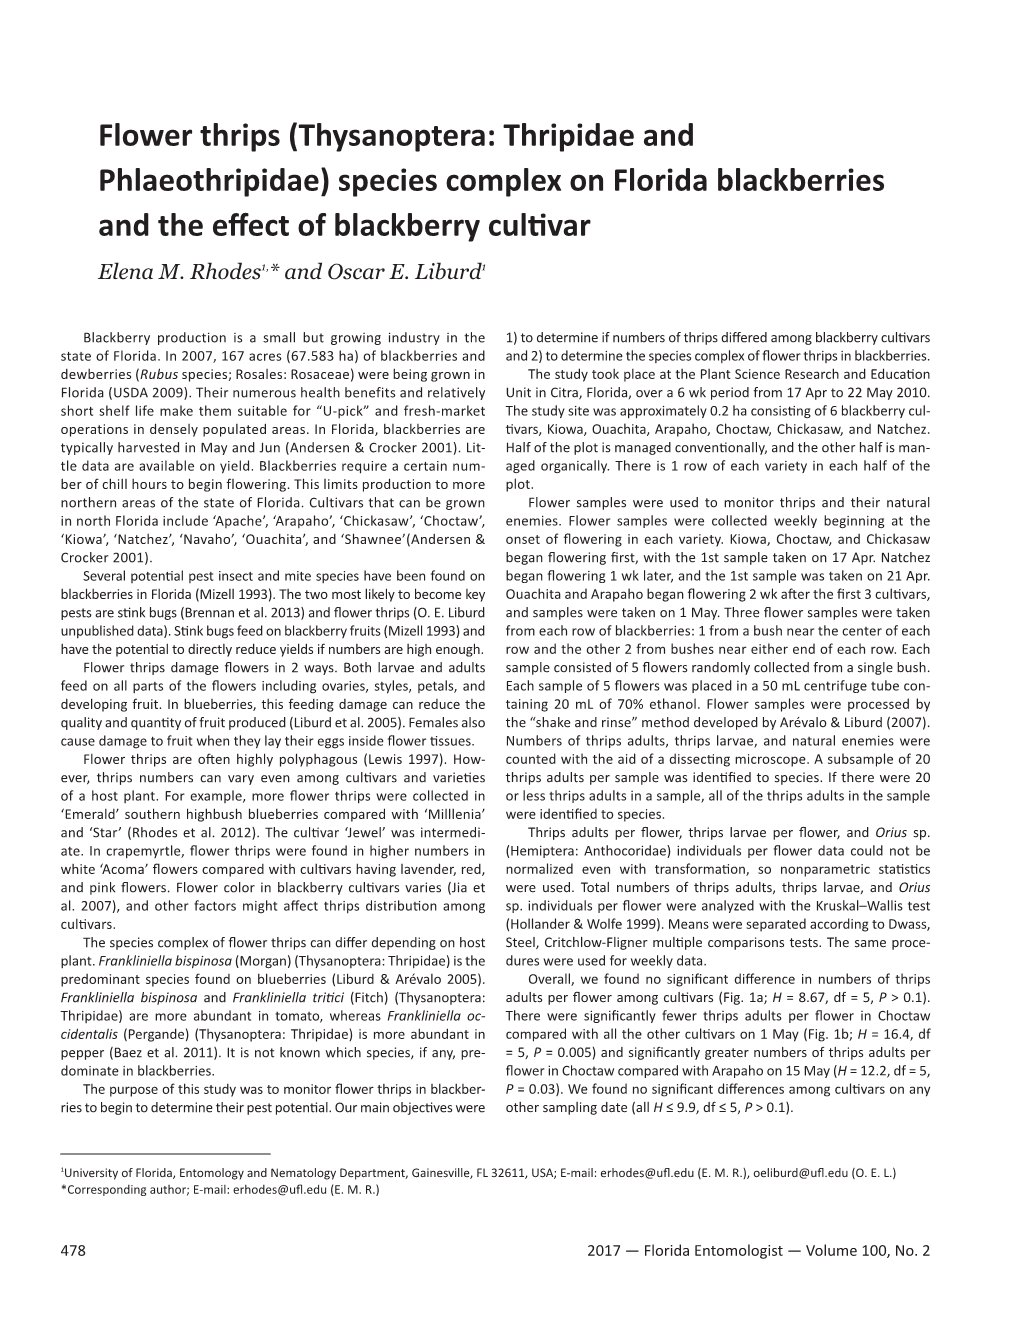 Flower Thrips (Thysanoptera: Thripidae and Phlaeothripidae) Species Complex on Florida Blackberries and the Effect of Blackberry Cultivar